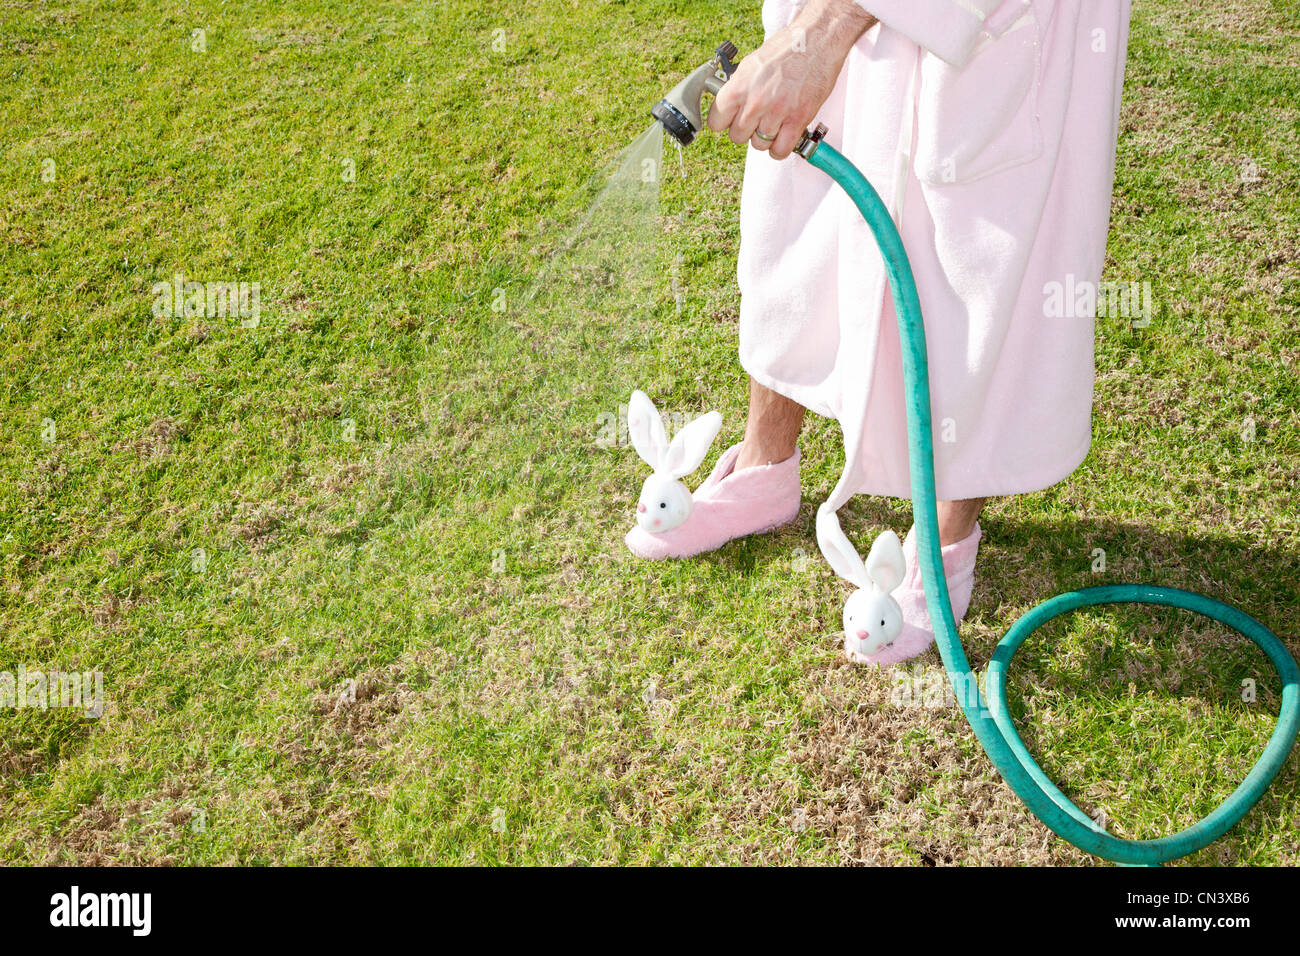 Man in pink robe and bunny slippers watering lawn Stock Photo